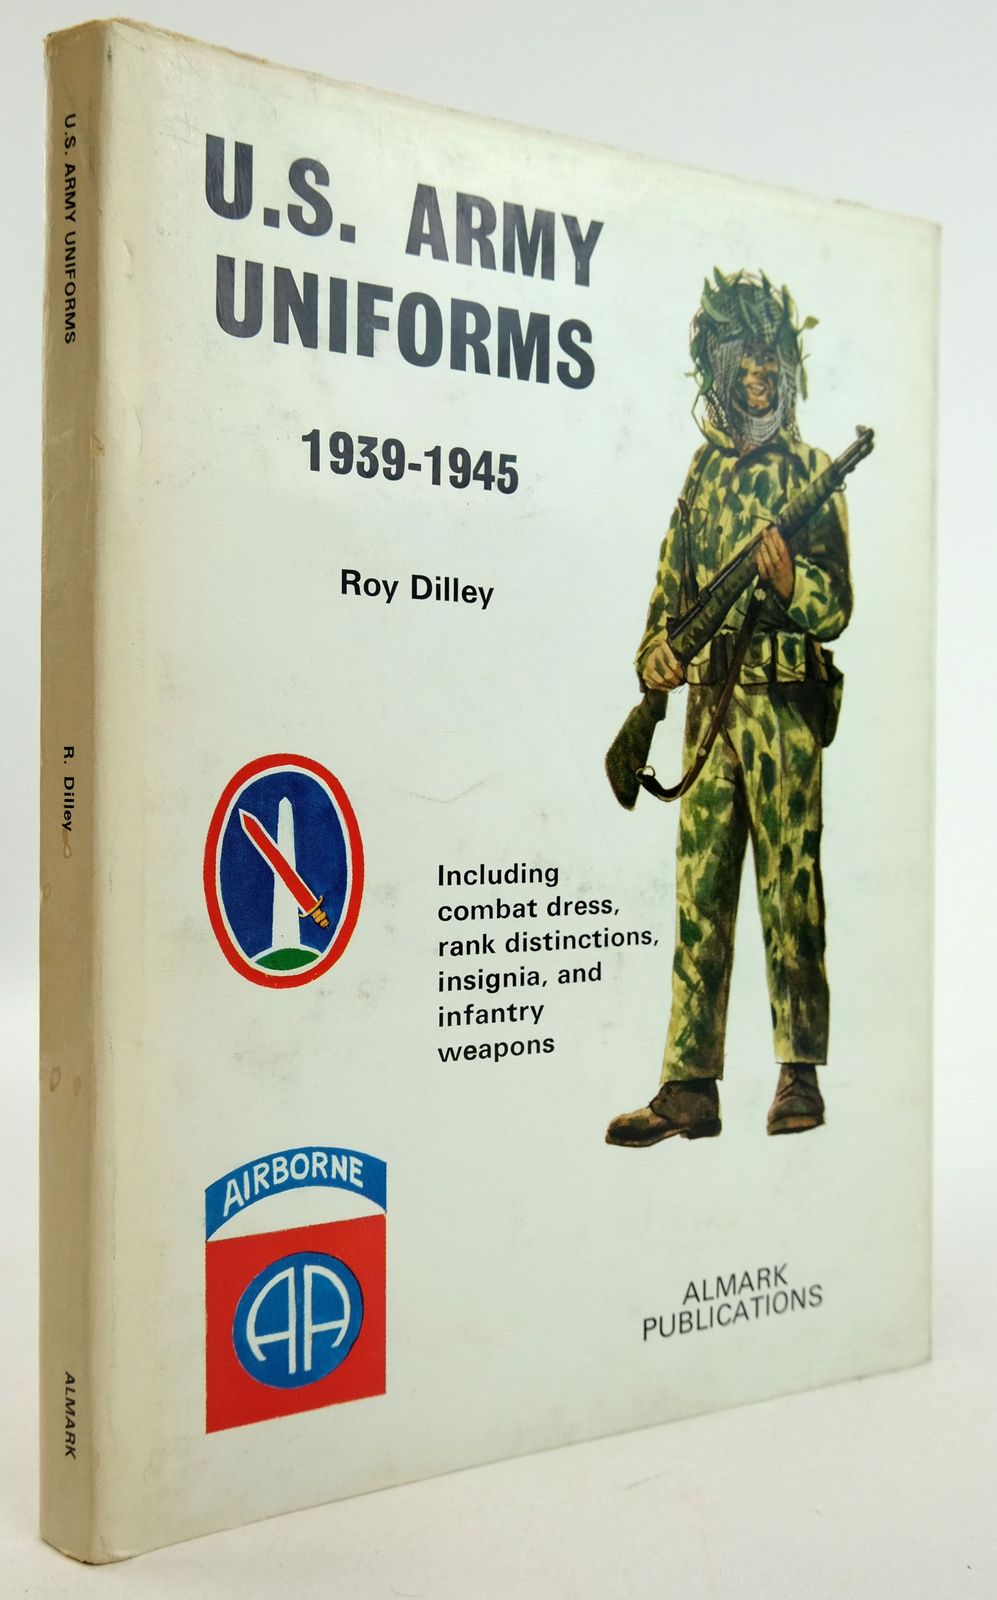 Photo of UNITED STATES ARMY UNIFORMS 1939-1945 written by Dilley, Roy published by Almark Publishing Co. Ltd. (STOCK CODE: 1819741)  for sale by Stella & Rose's Books